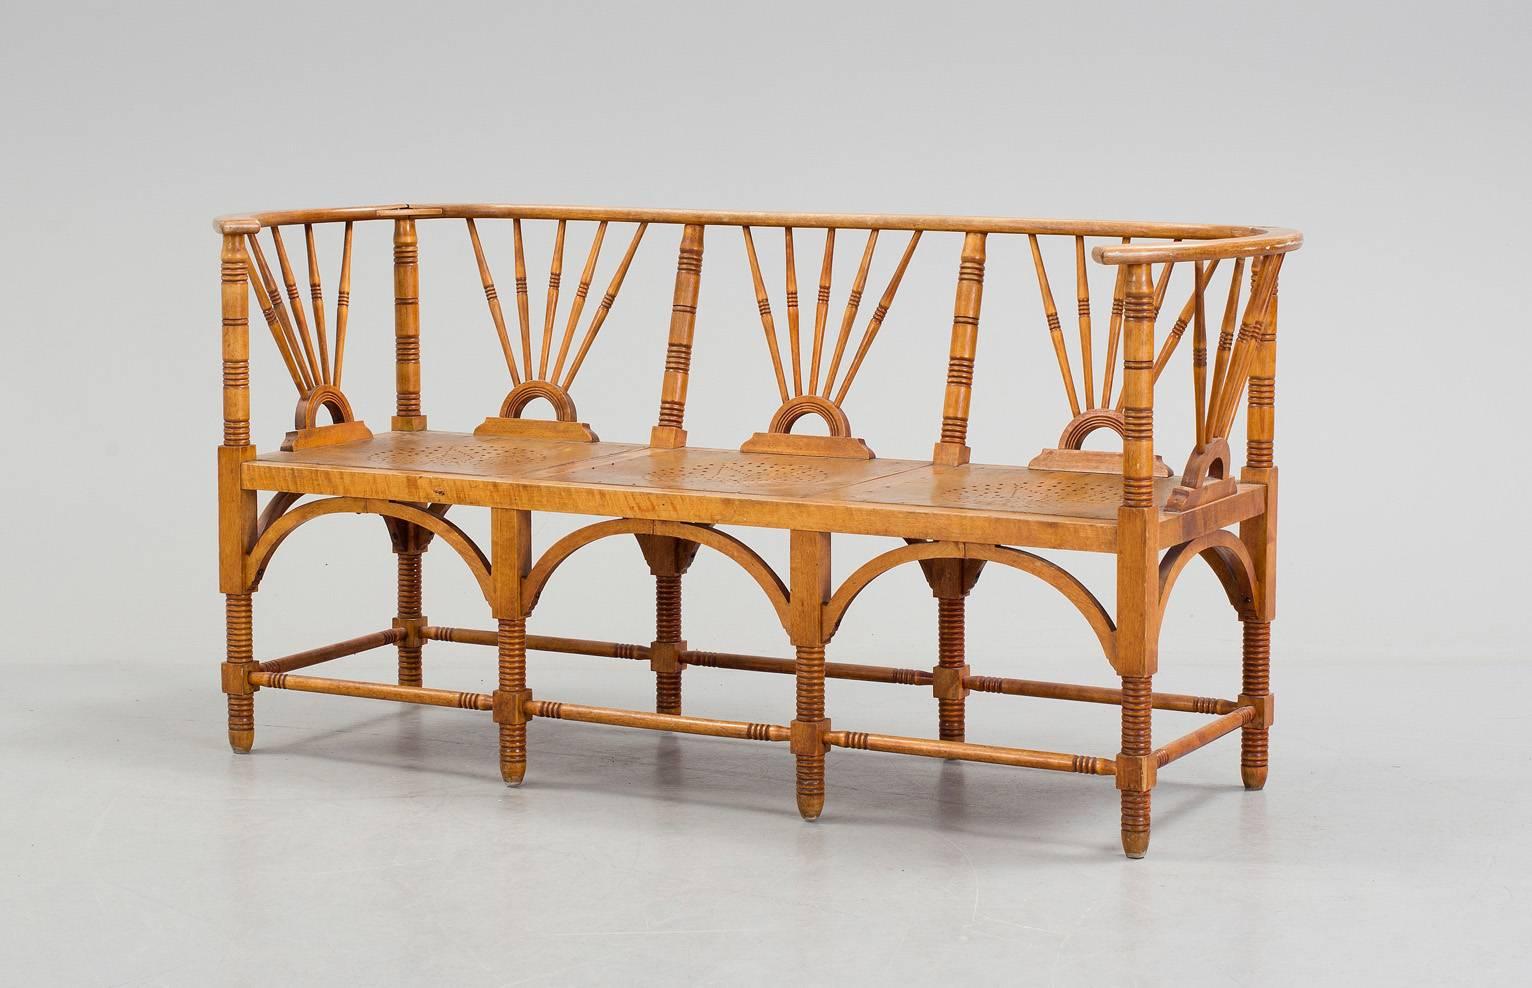 An Arts & Craft movement three-seat bench 
The solid birch frame supporting the seats with open star motifs
England, circa 1890.